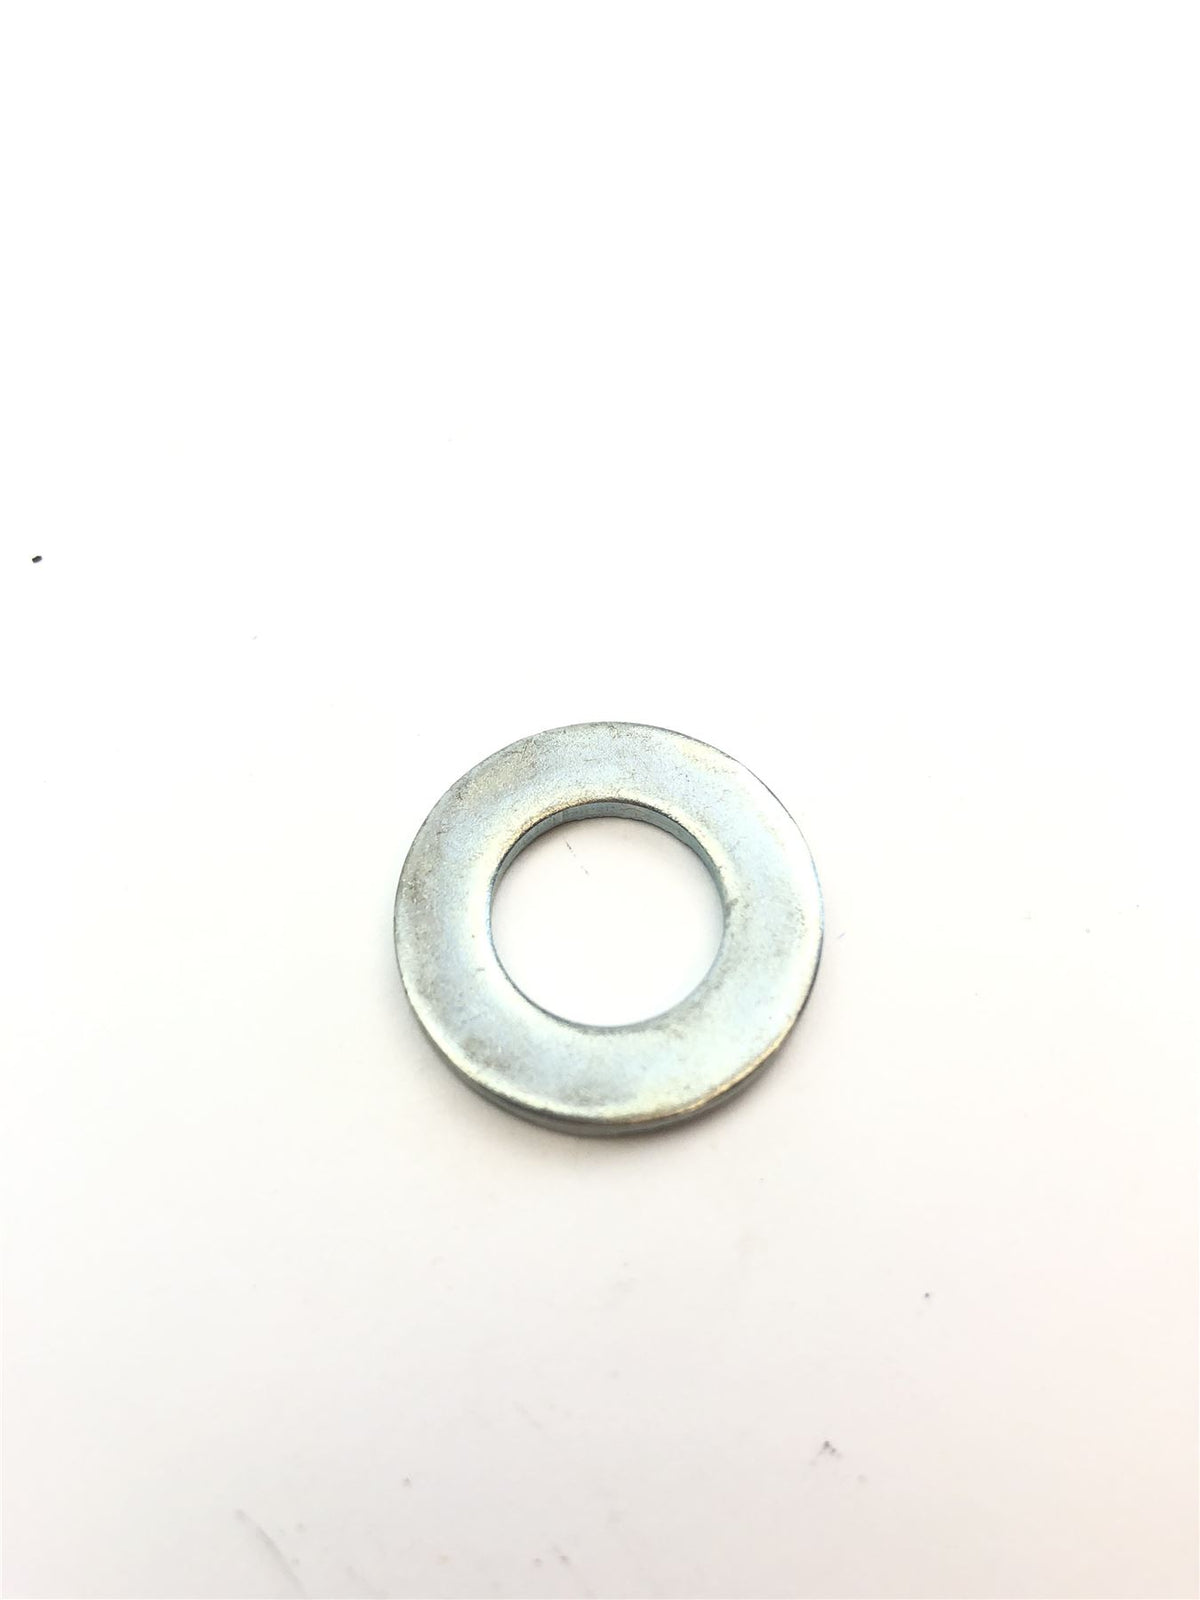 Lambretta - Front Hub Spindle Location Washer